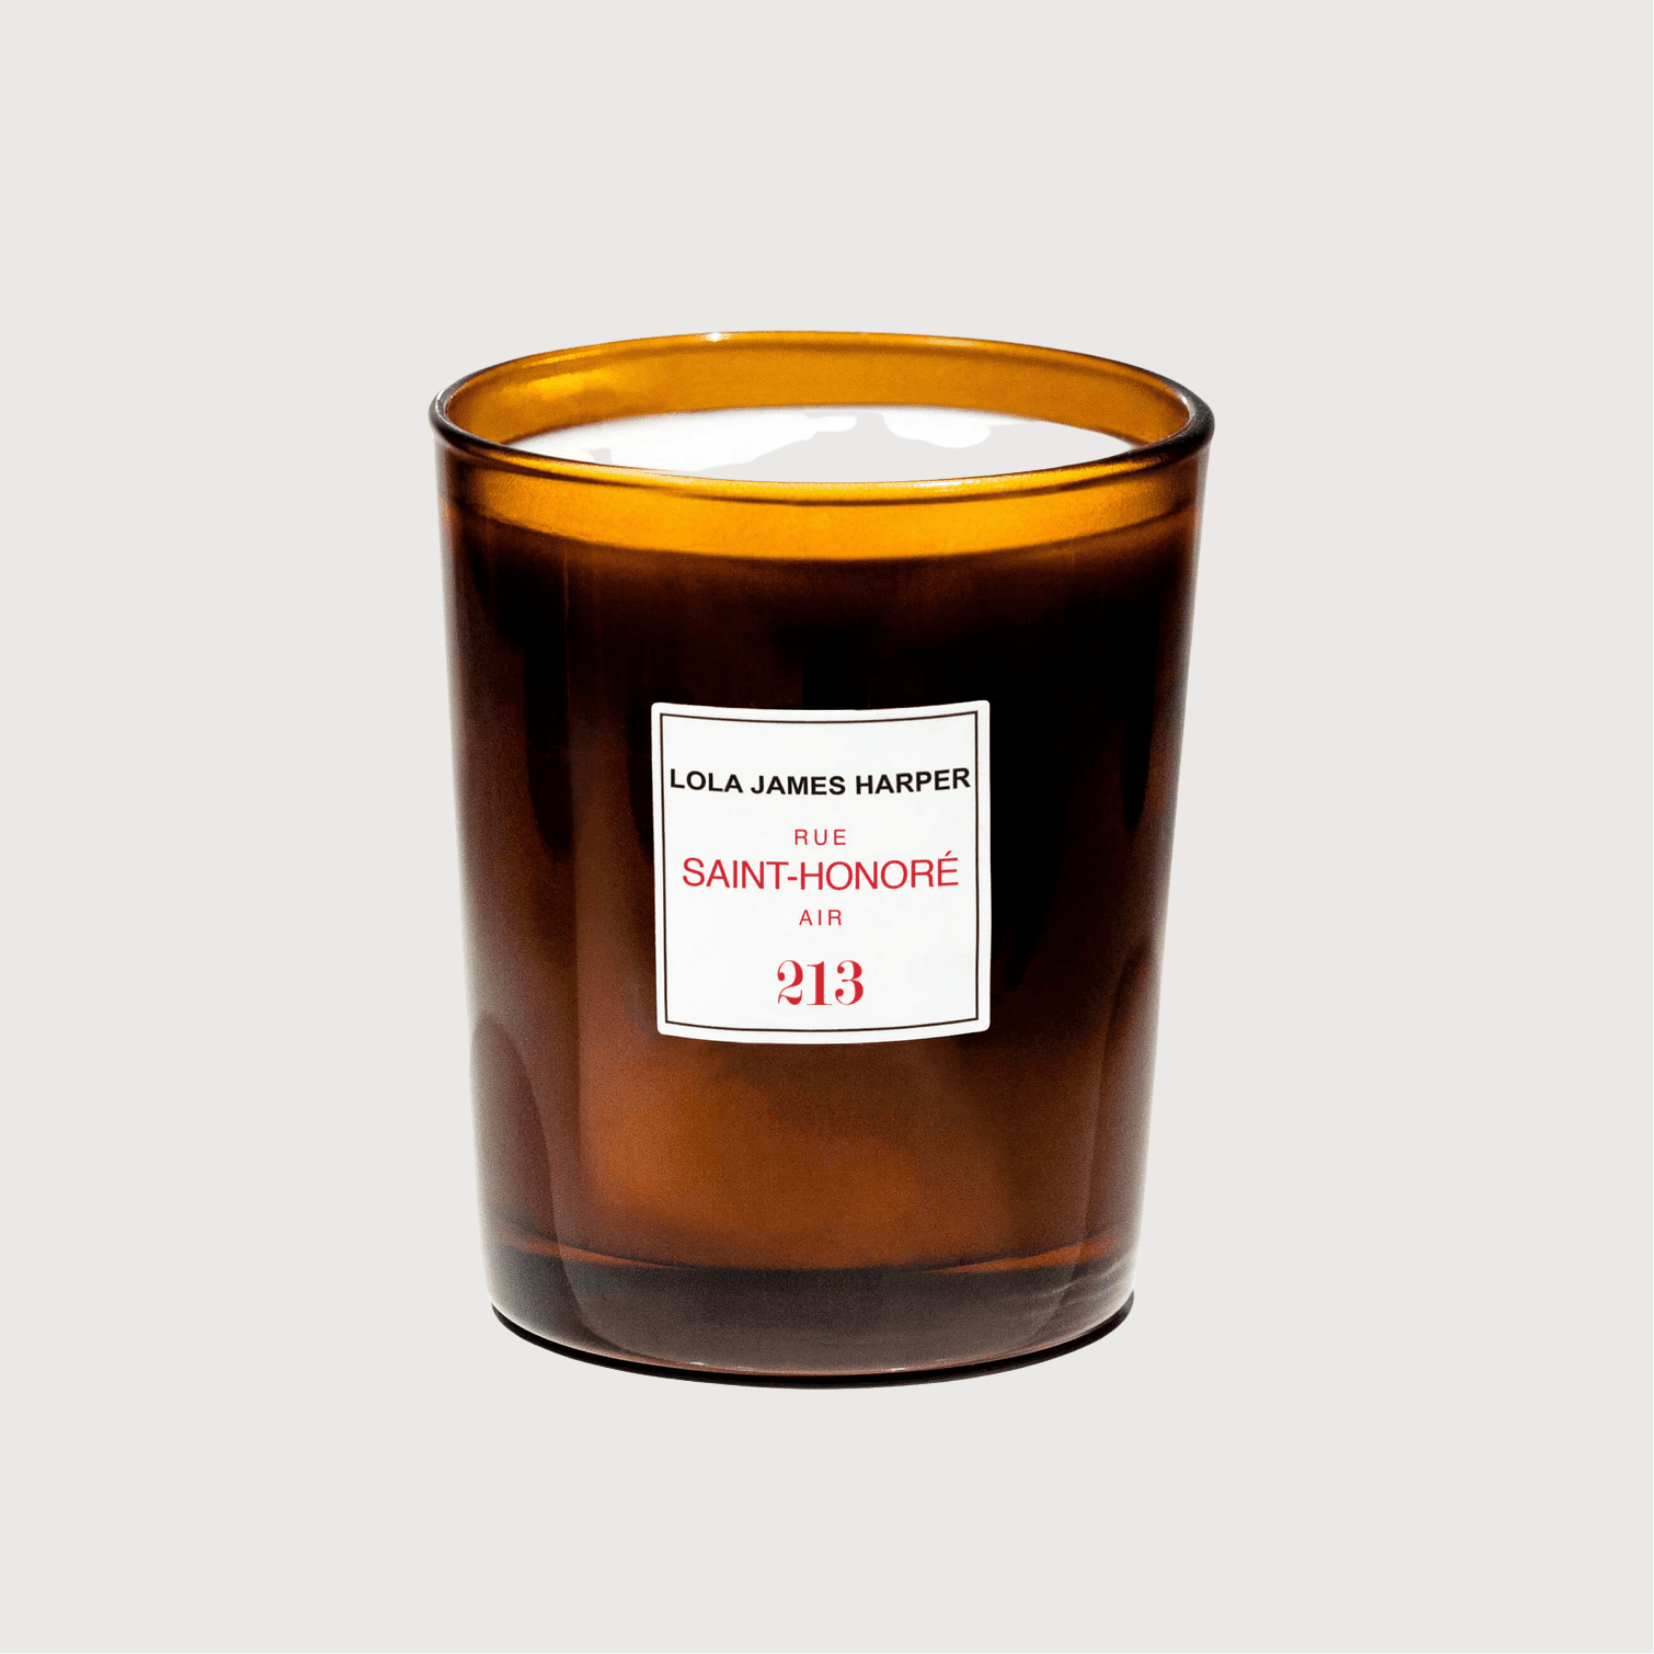 Rue Saint Honore-Air Candle by Lola James Harper - Haven